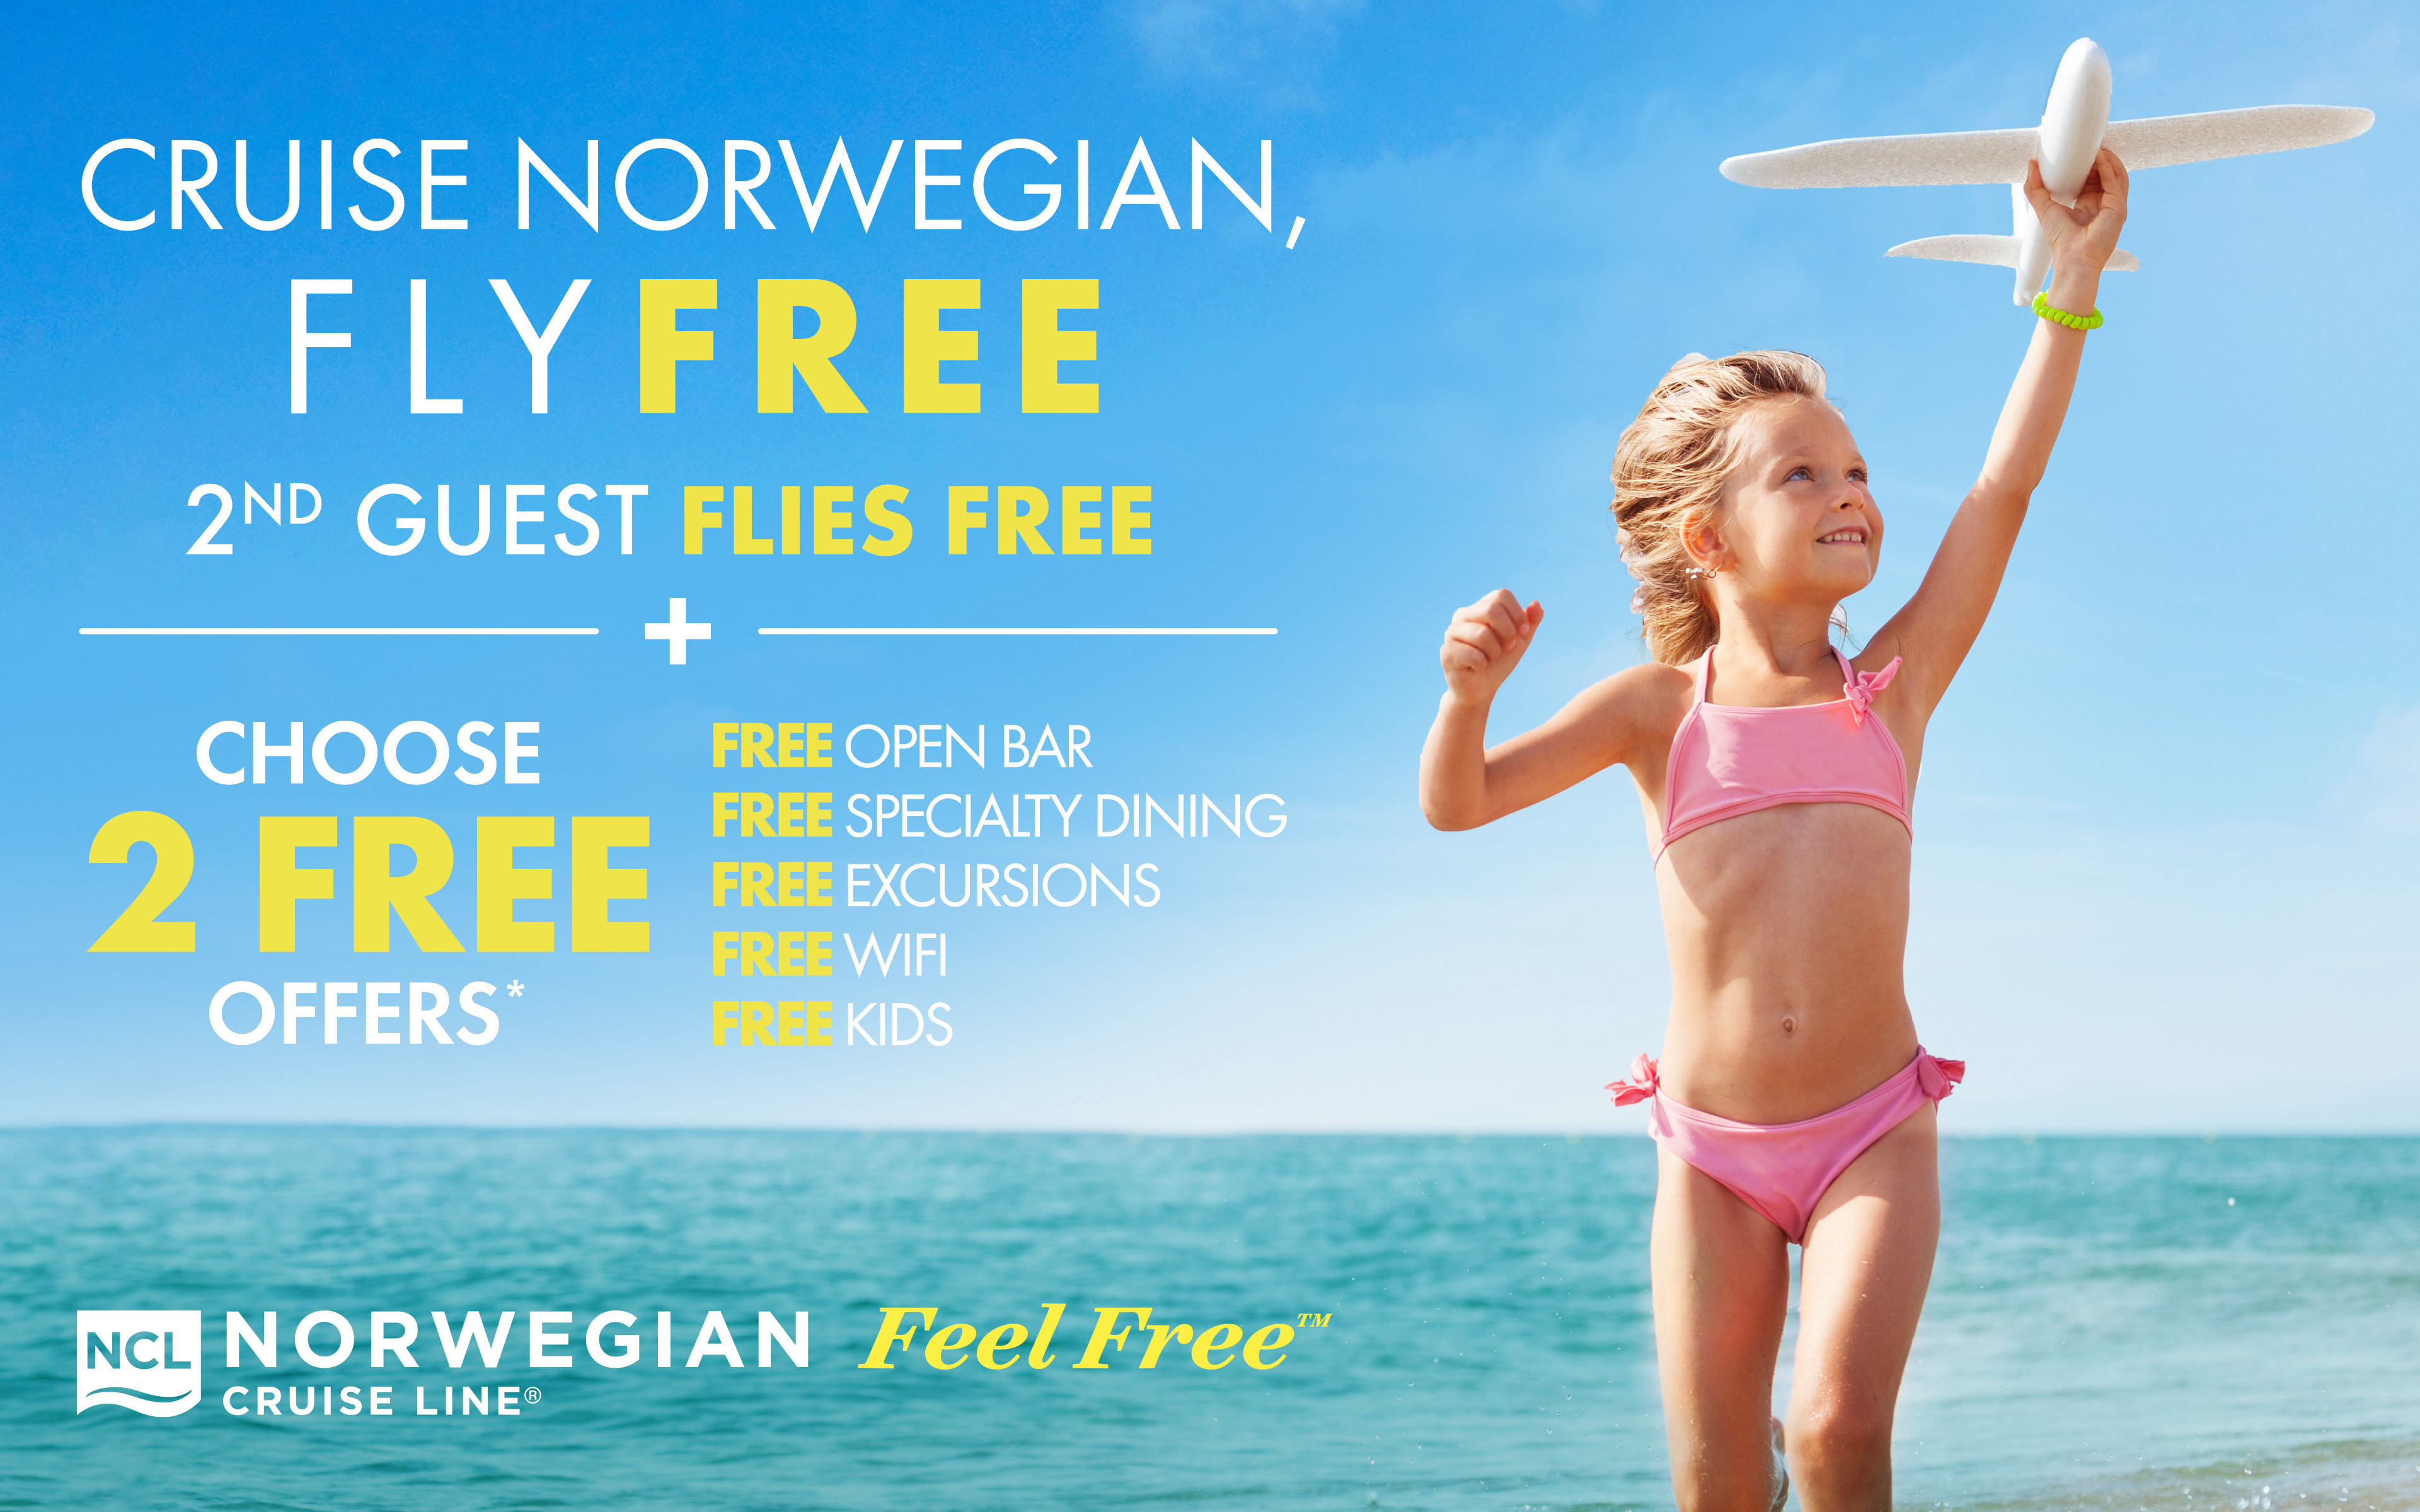 Fly FREE + Choose 2 FREE Offers with Norwegian